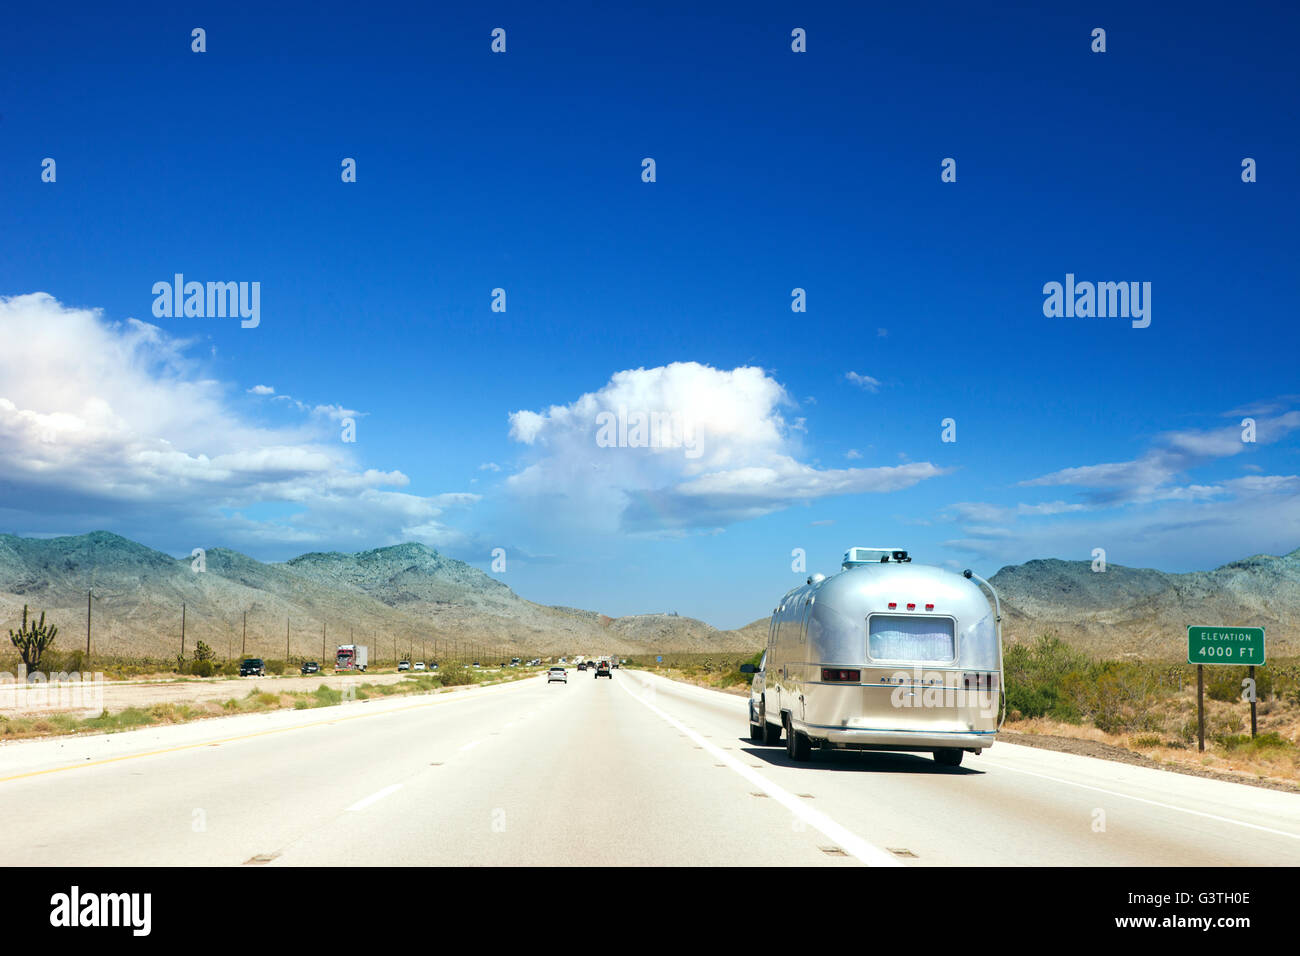 USA, Nevada, View of campervan on road Stock Photo